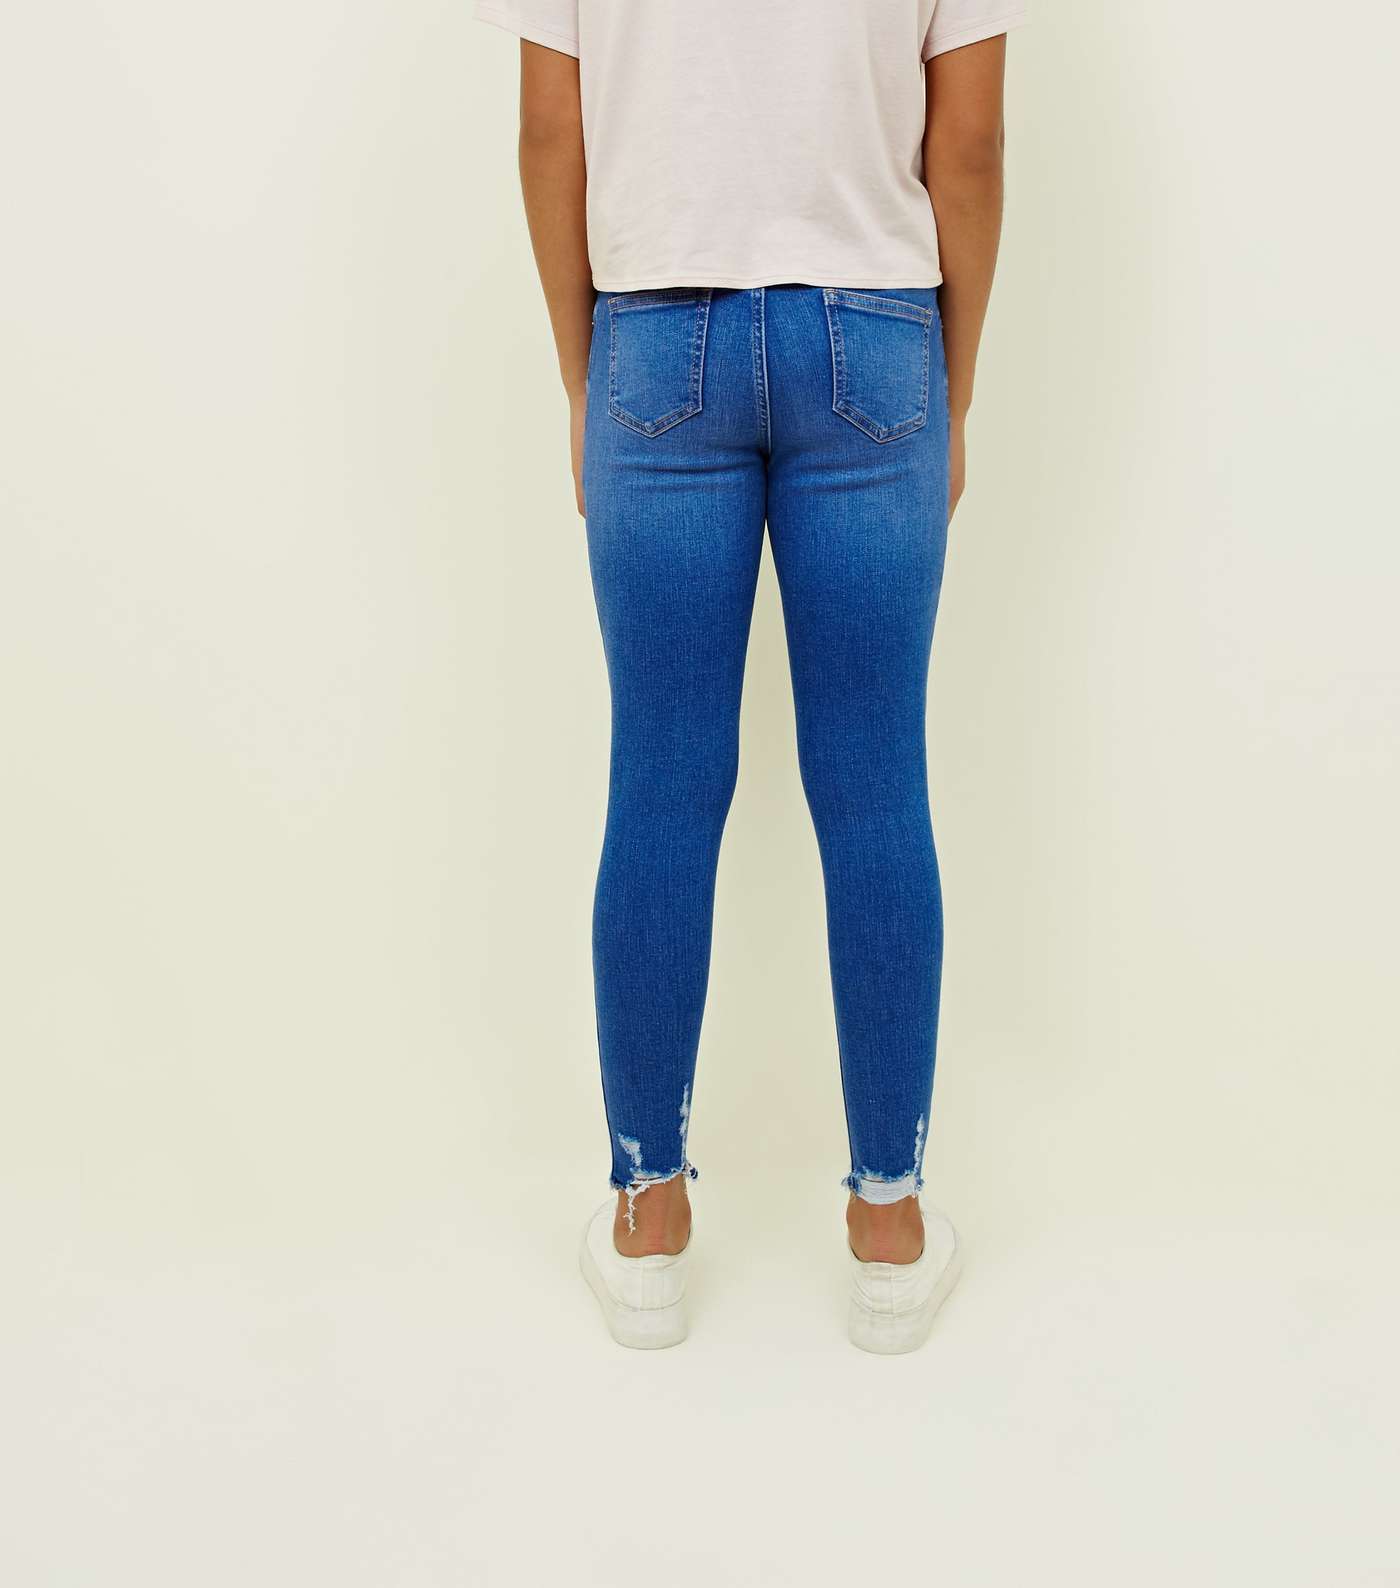 Girls Bright Blue Ripped Skinny Jeans Image 3